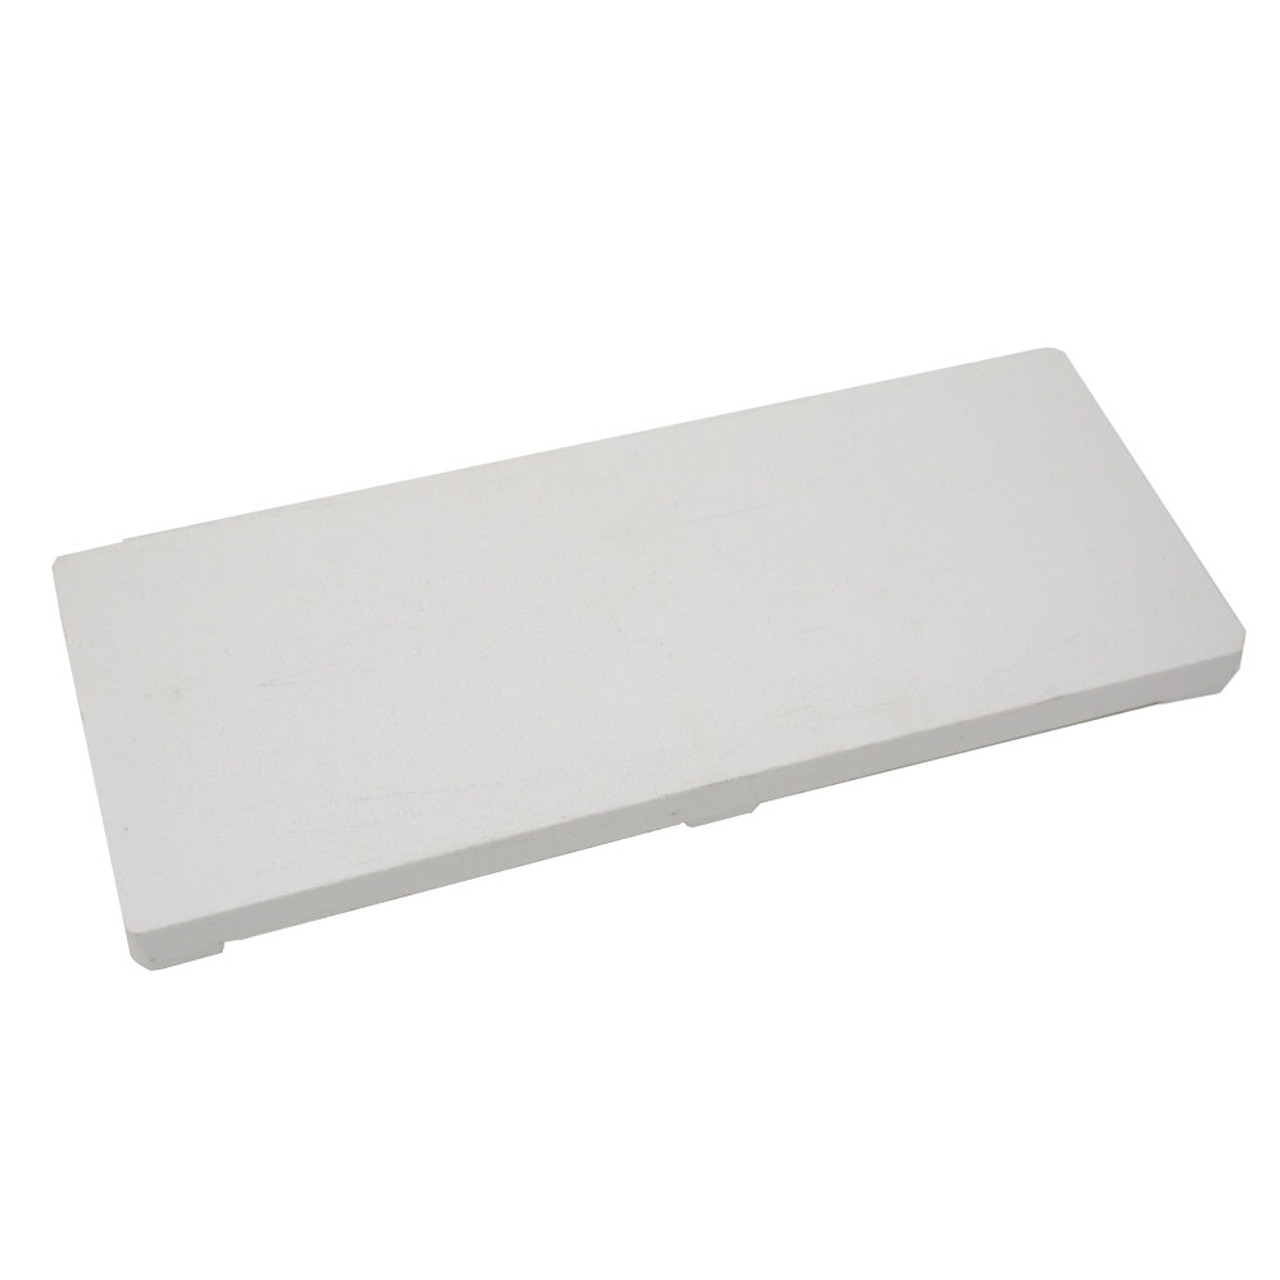 Ceramic Soldering Board with Feet 4.5 x 11.5 Inches